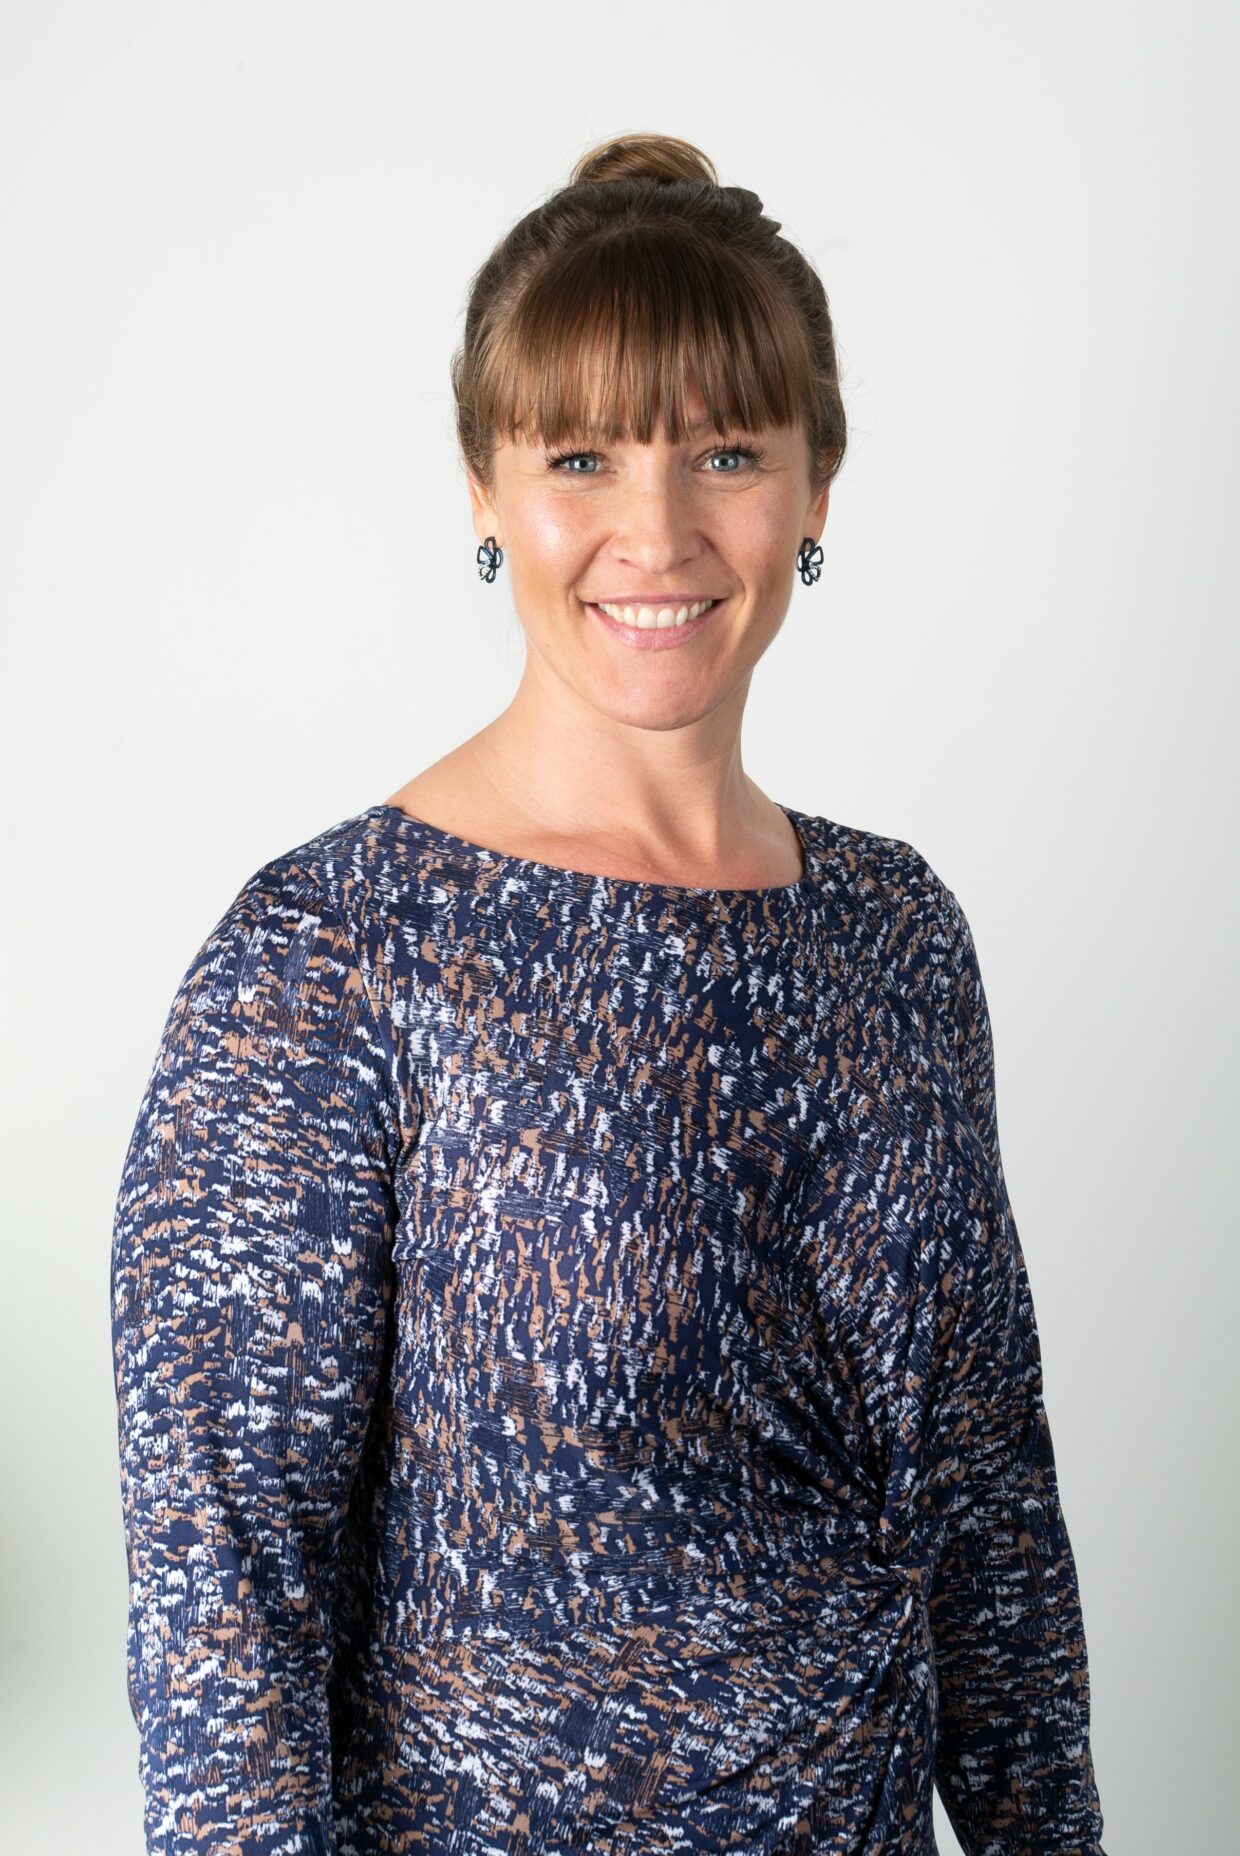 Tracy has brown hair tied in a bun and is smiling at the camera. Tracy is standing against a white background and it wearing a blue top with white and orange dots.